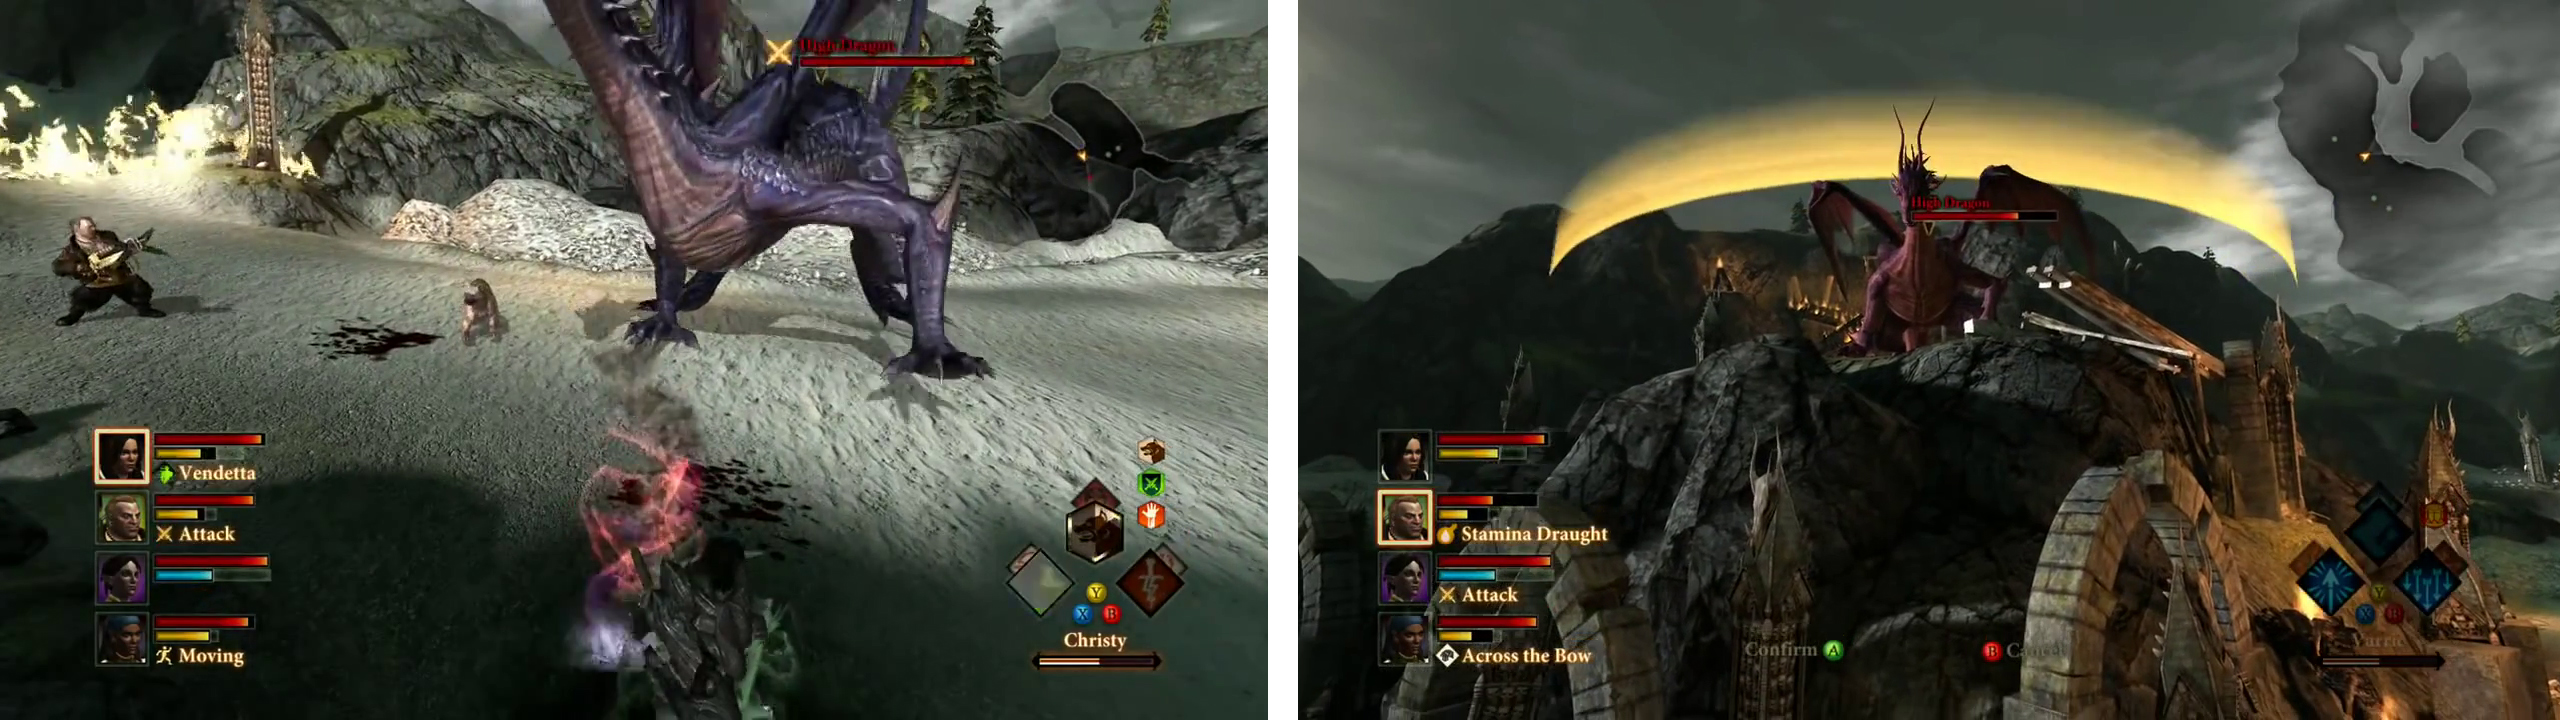 The dragon will fight on both the ground (left) and from a perch in the centre of the area (right).